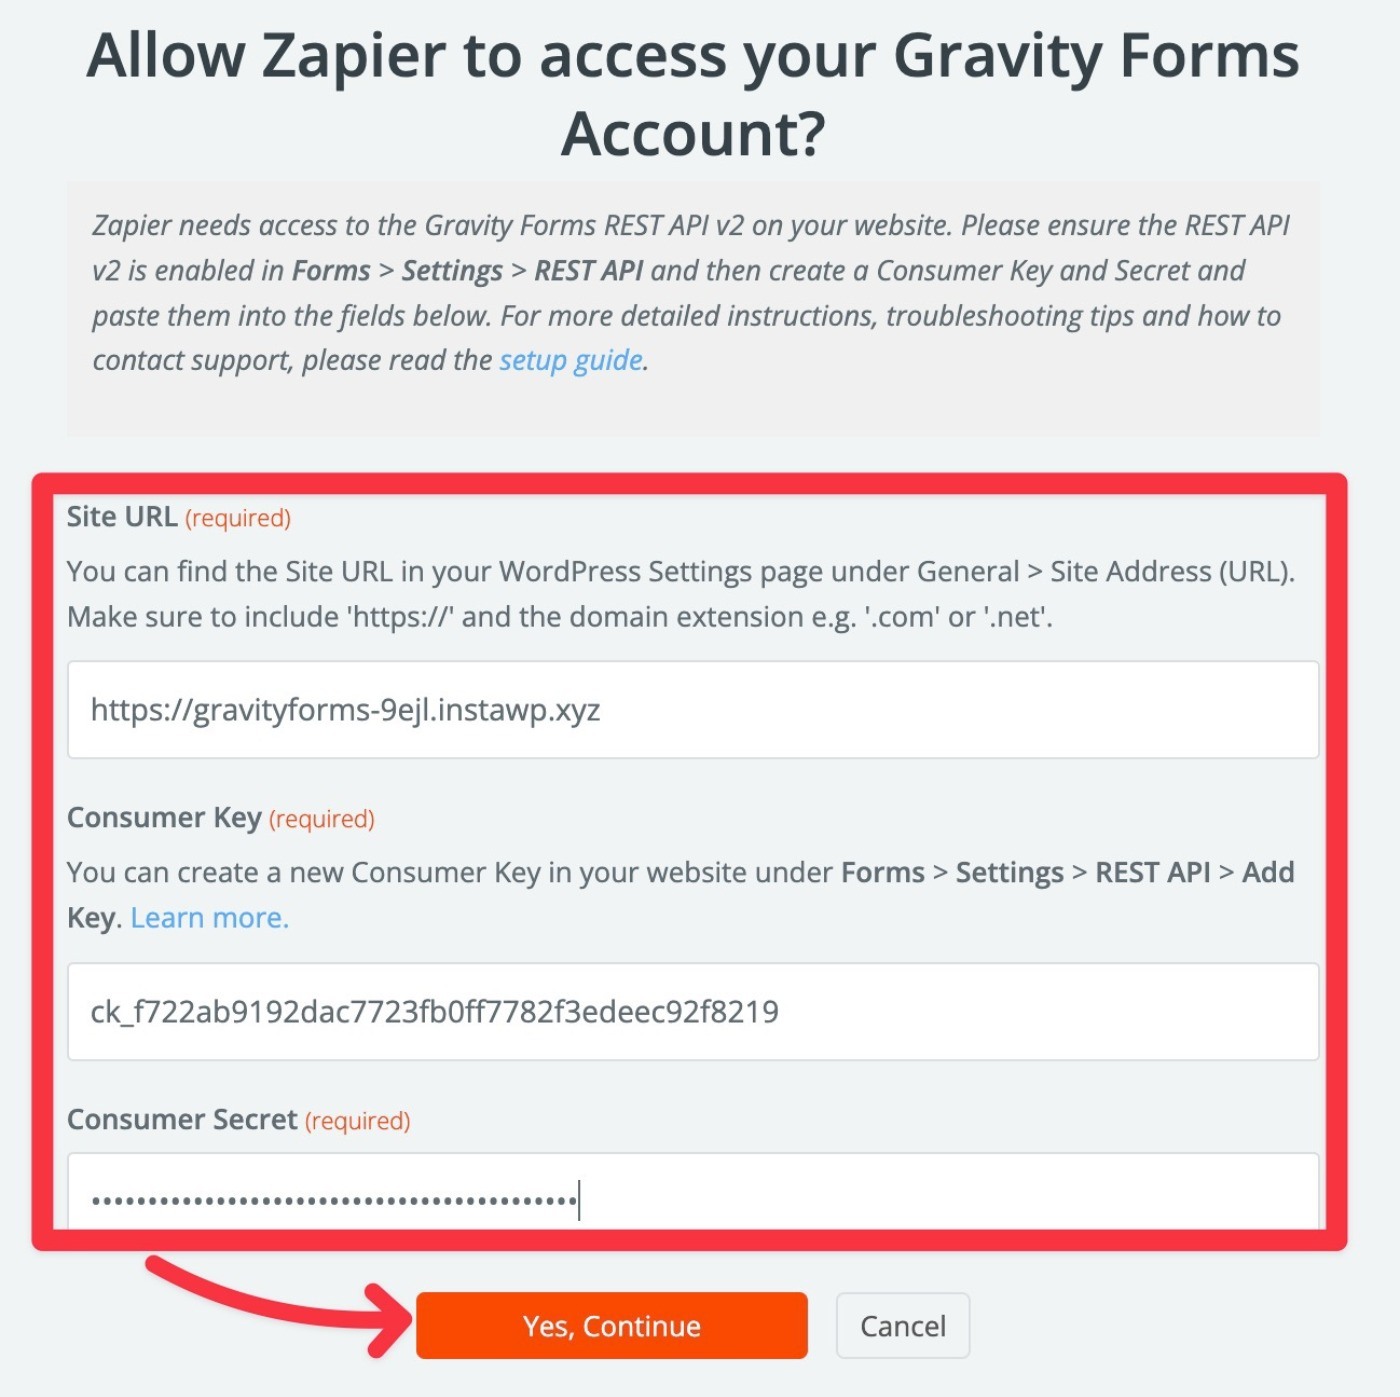 Allow Zapier access to Gravity Forms